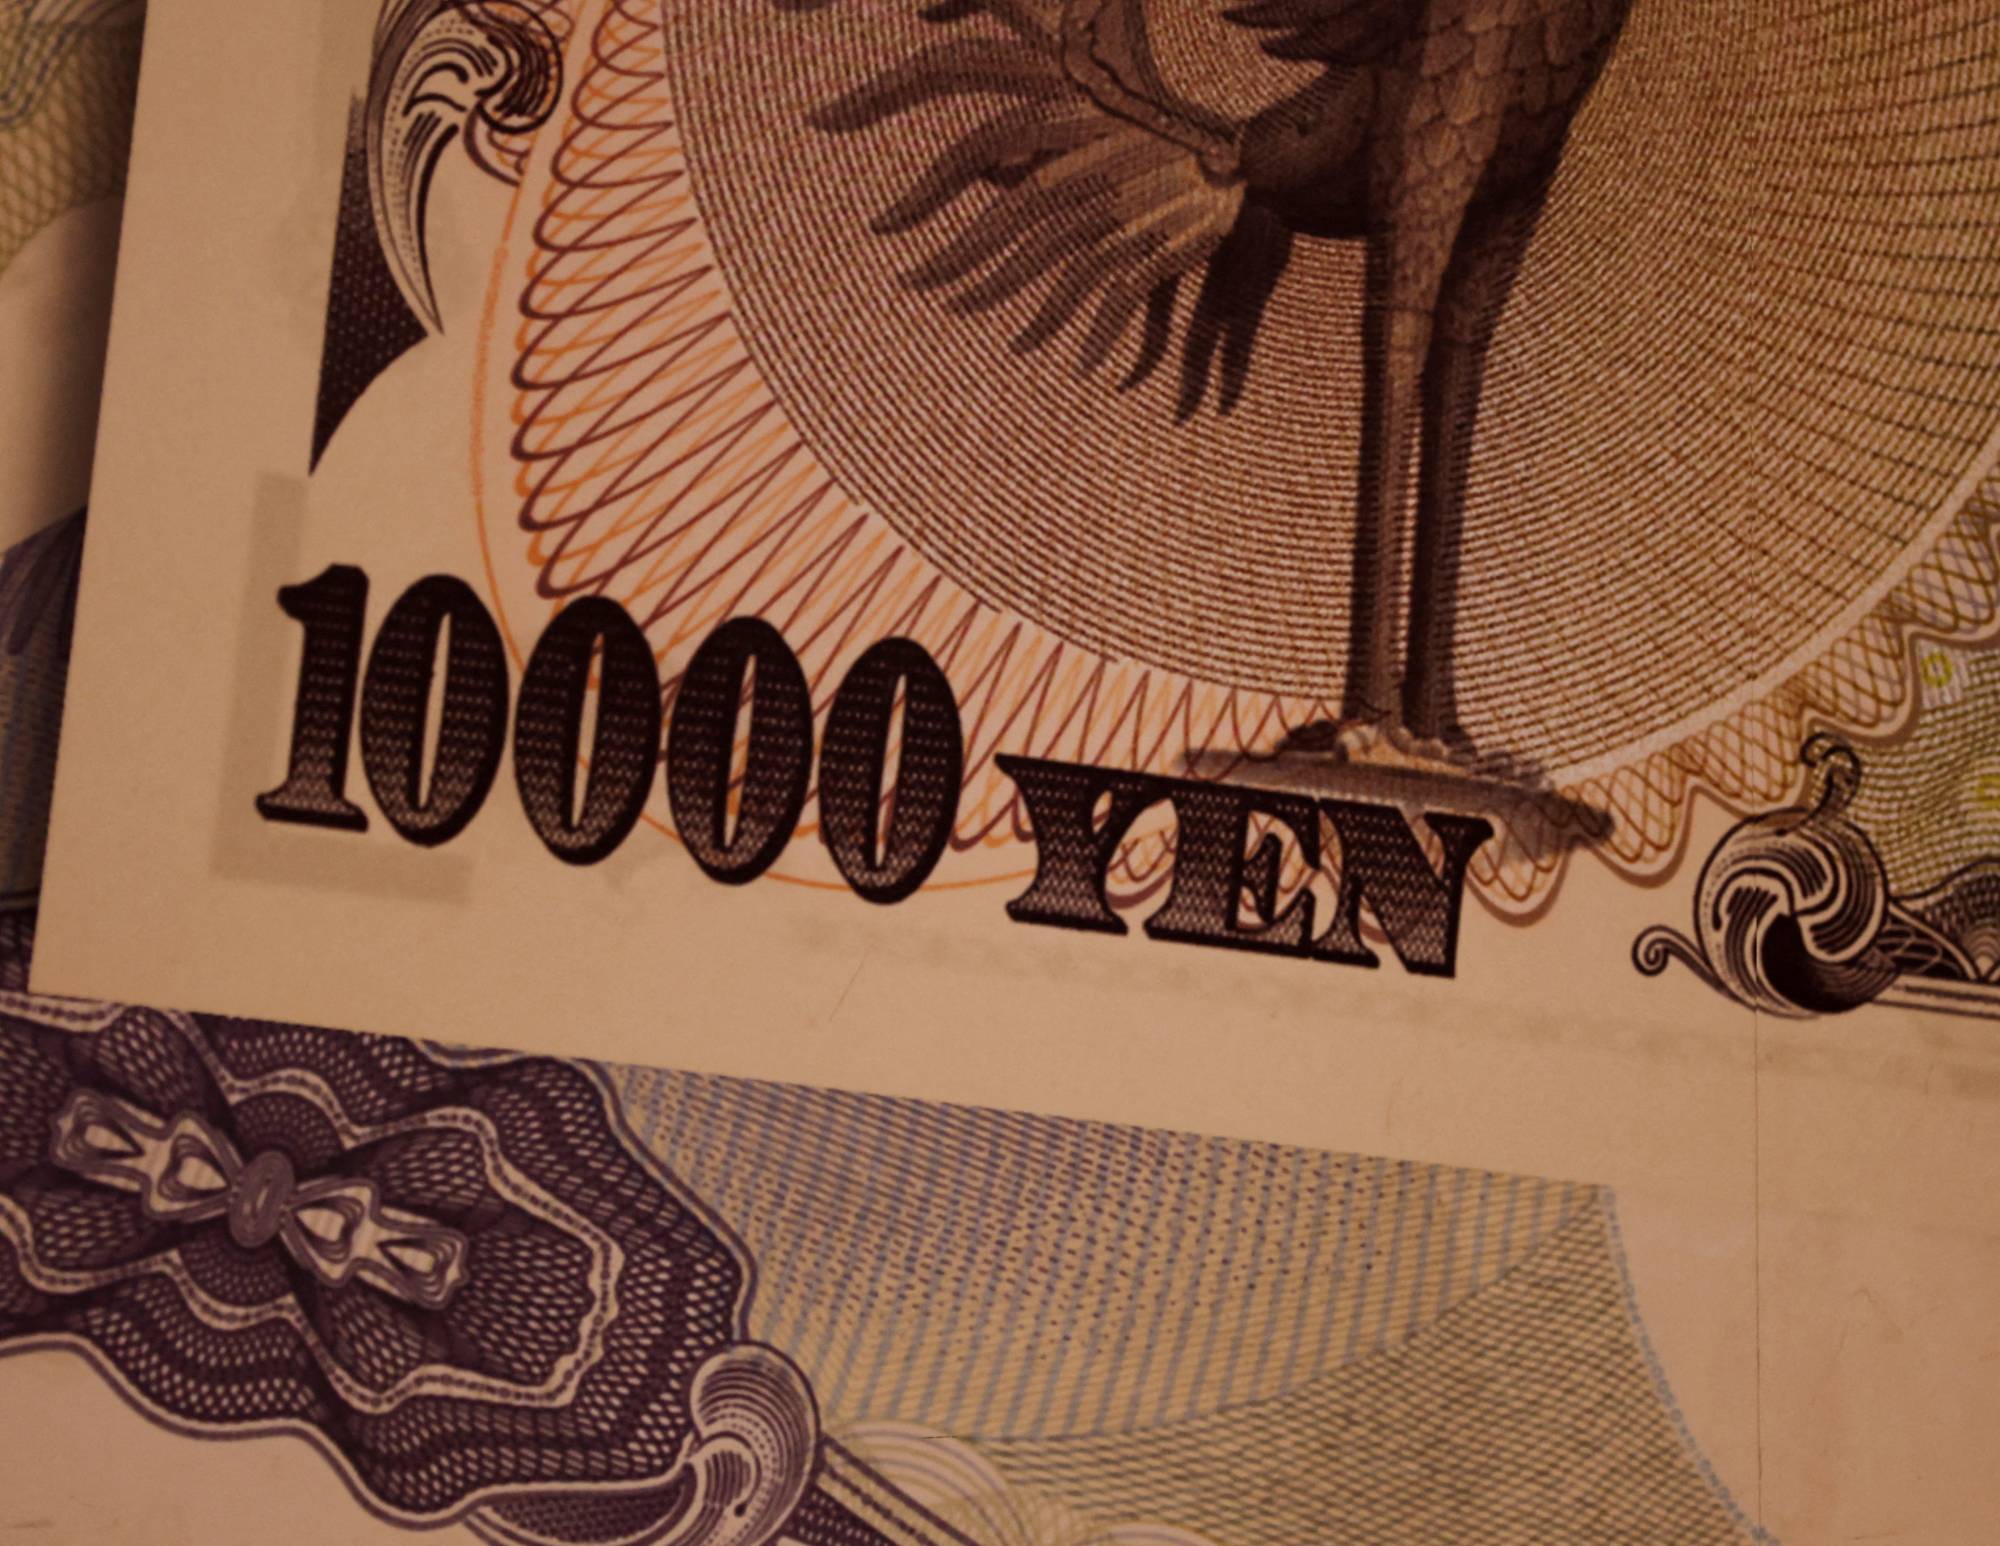 There are about 200 to 300 people in Japan who earn more than ¥3 billion, estimates suggest. | REUTERS